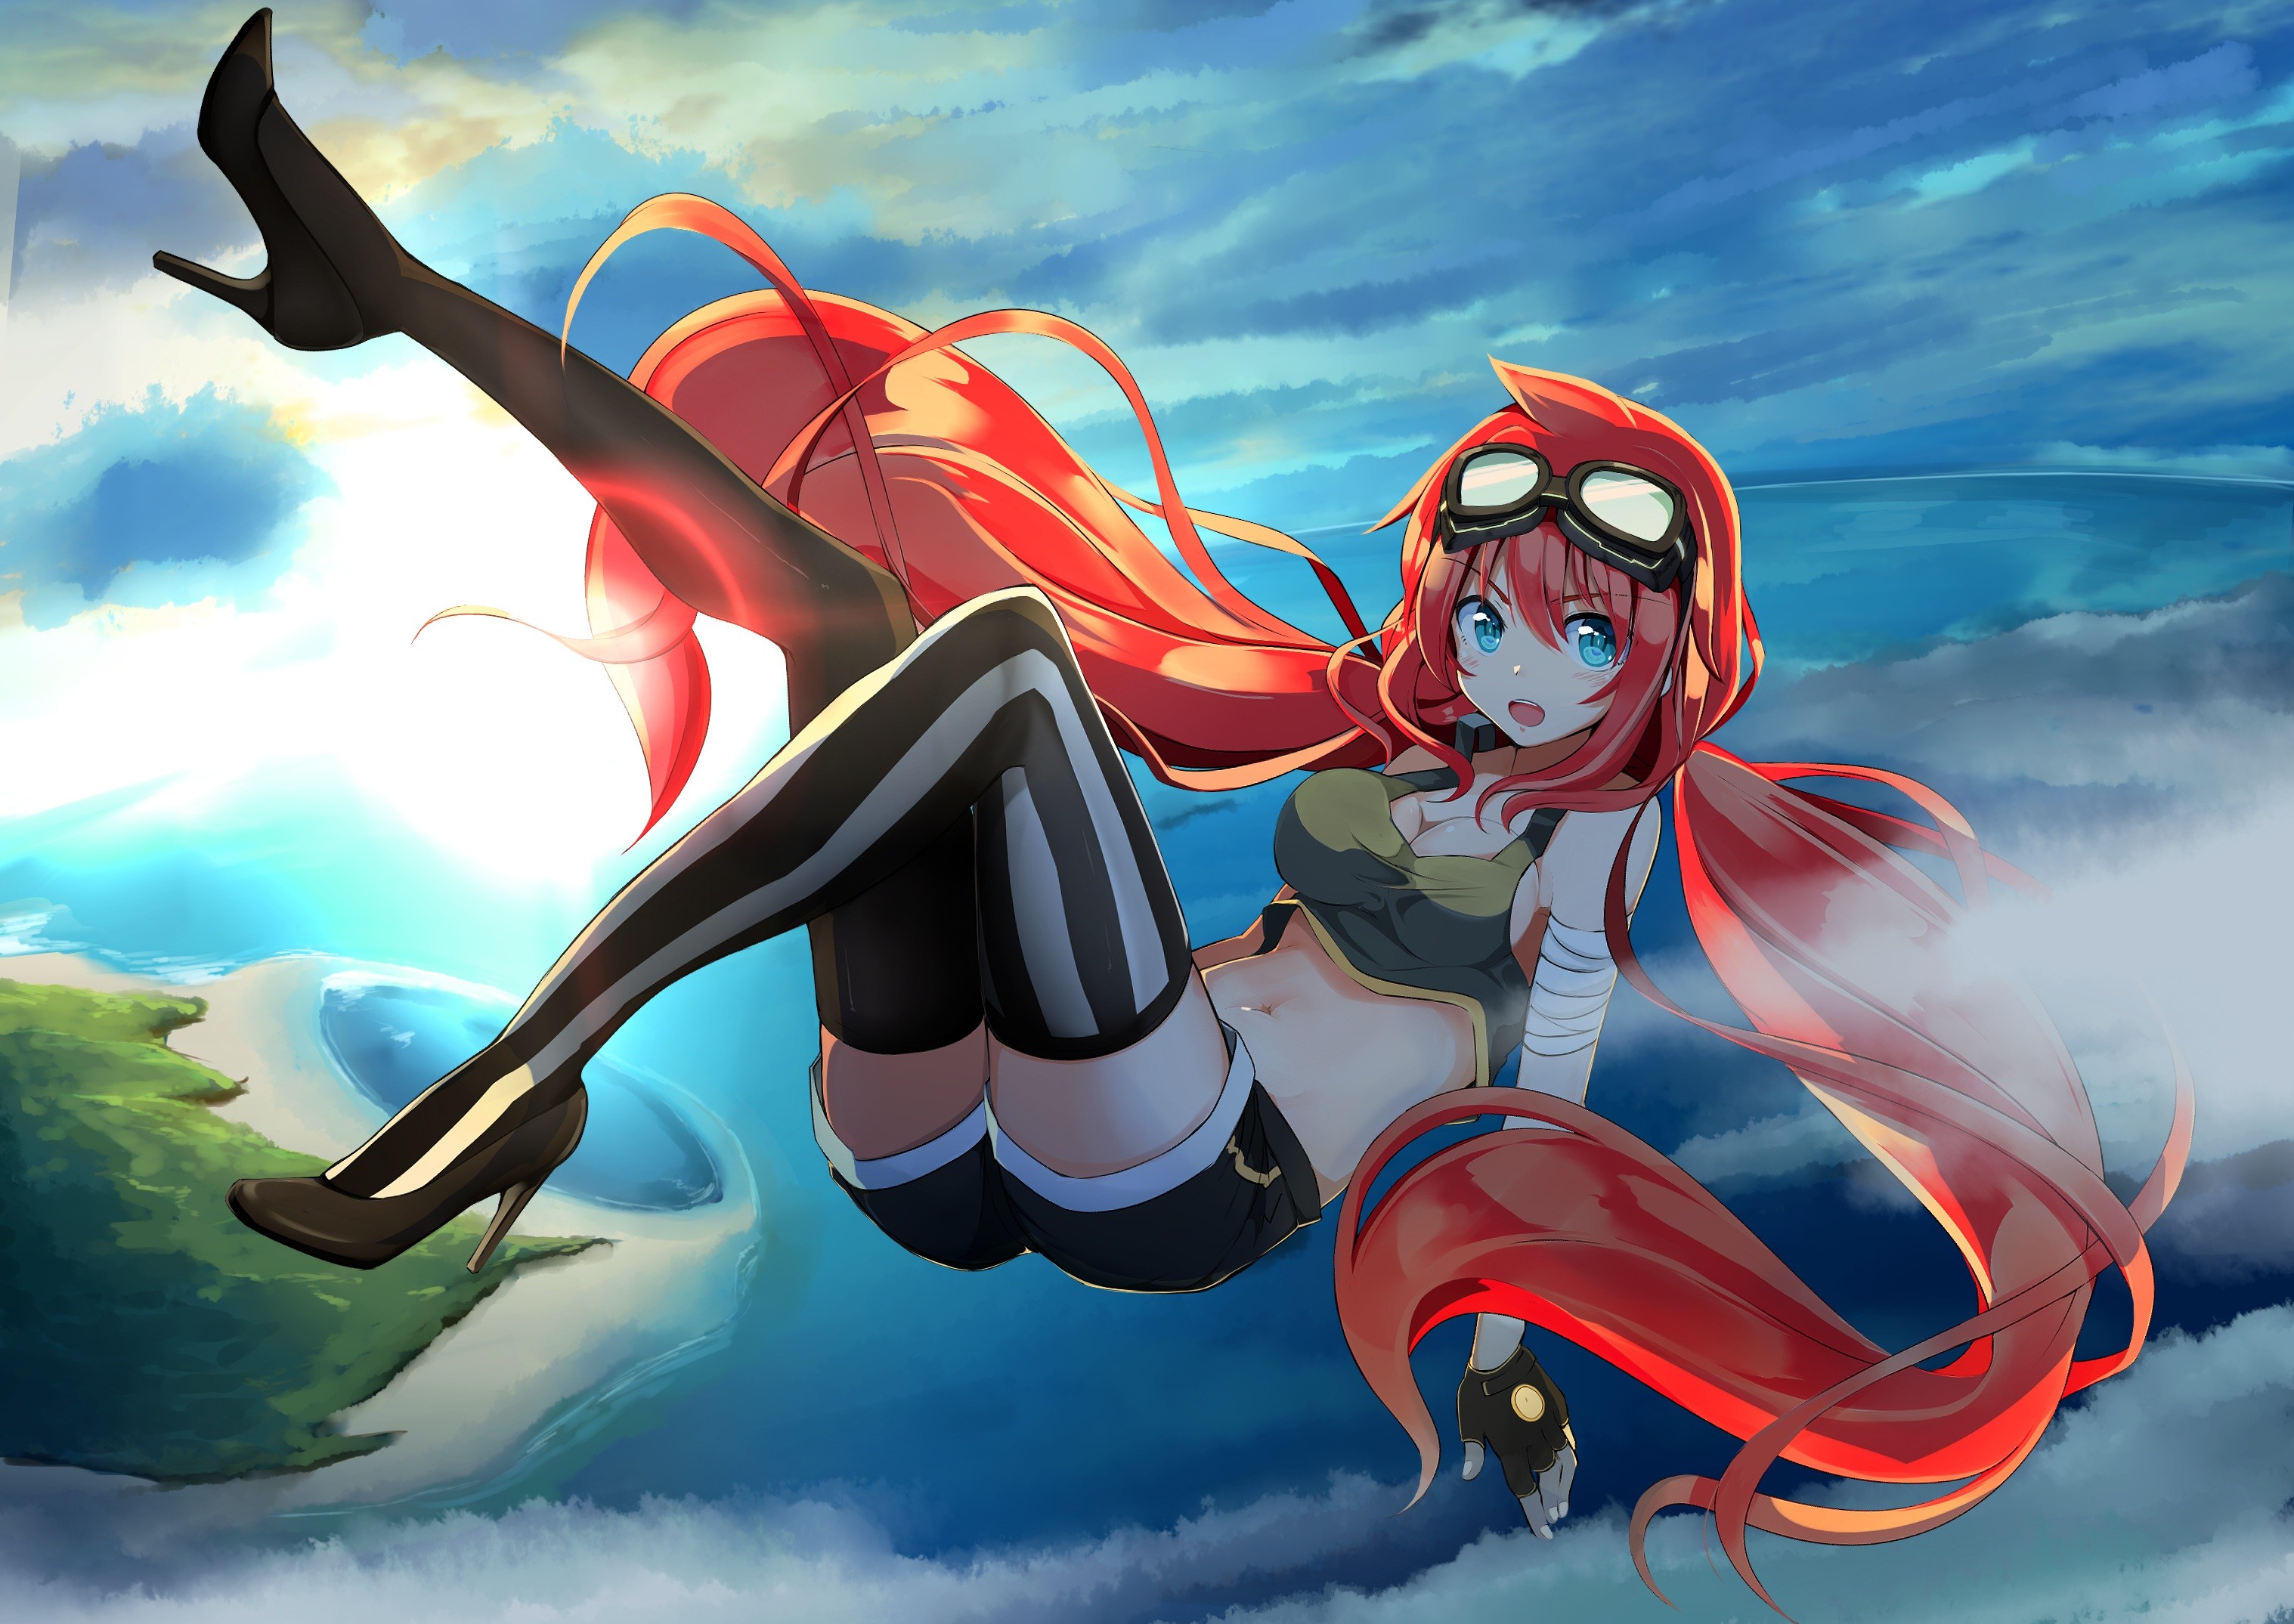 Anime 3035x2149 anime anime girls bandages cleavage heels redhead long hair Pixiv legs open mouth aqua eyes stockings striped stockings goggles